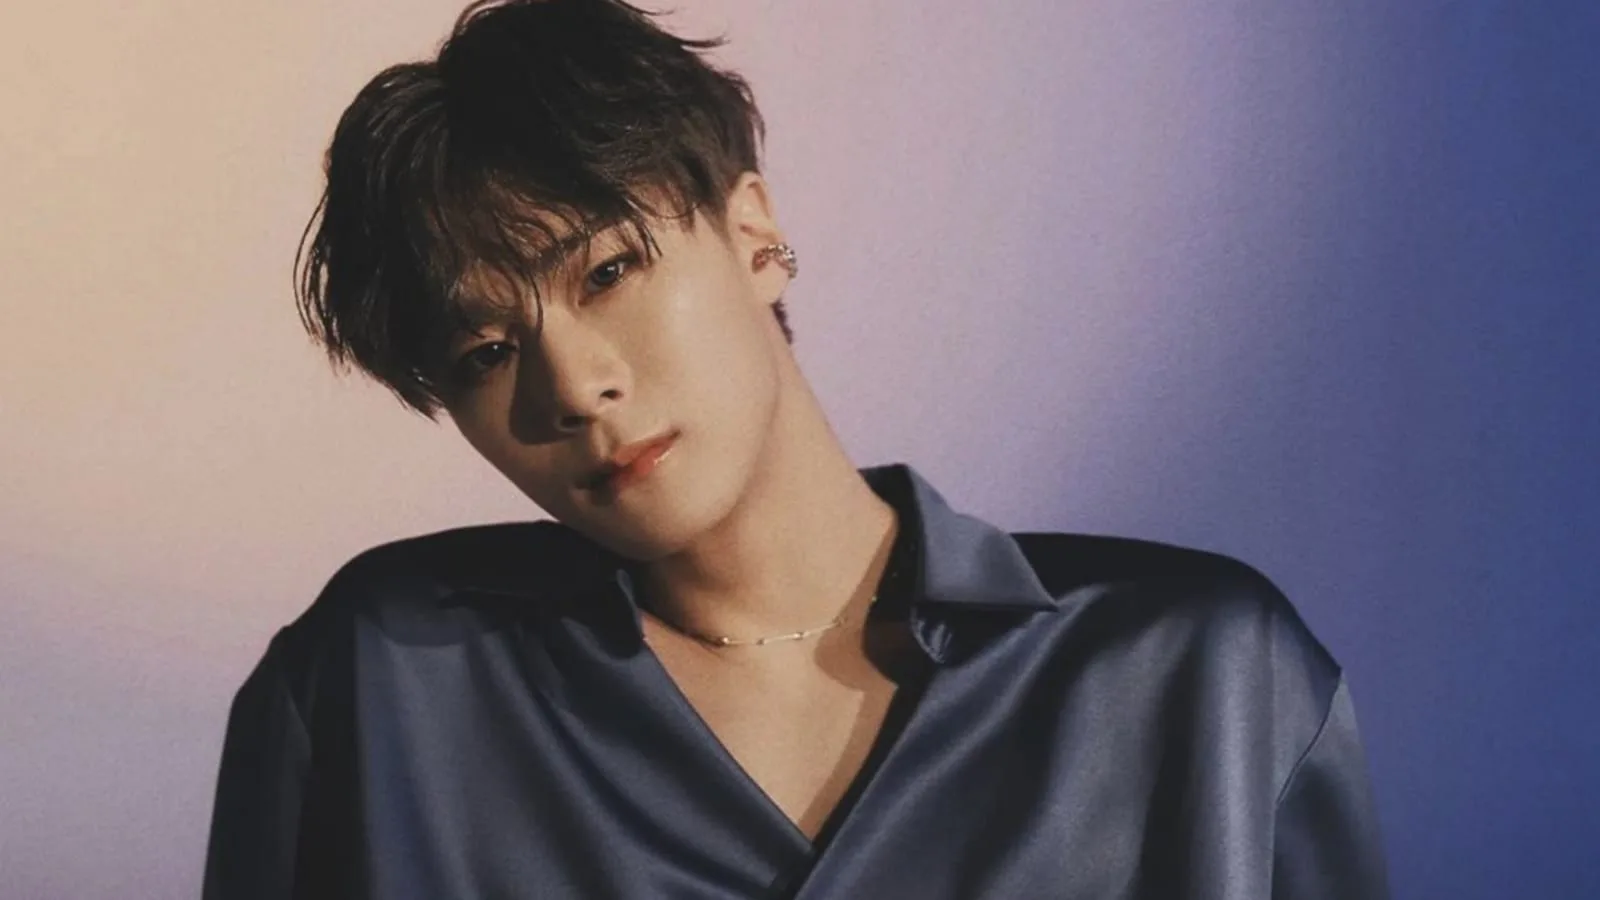 ASTRO’s Moonbin Sadly Found Dead Today At Home